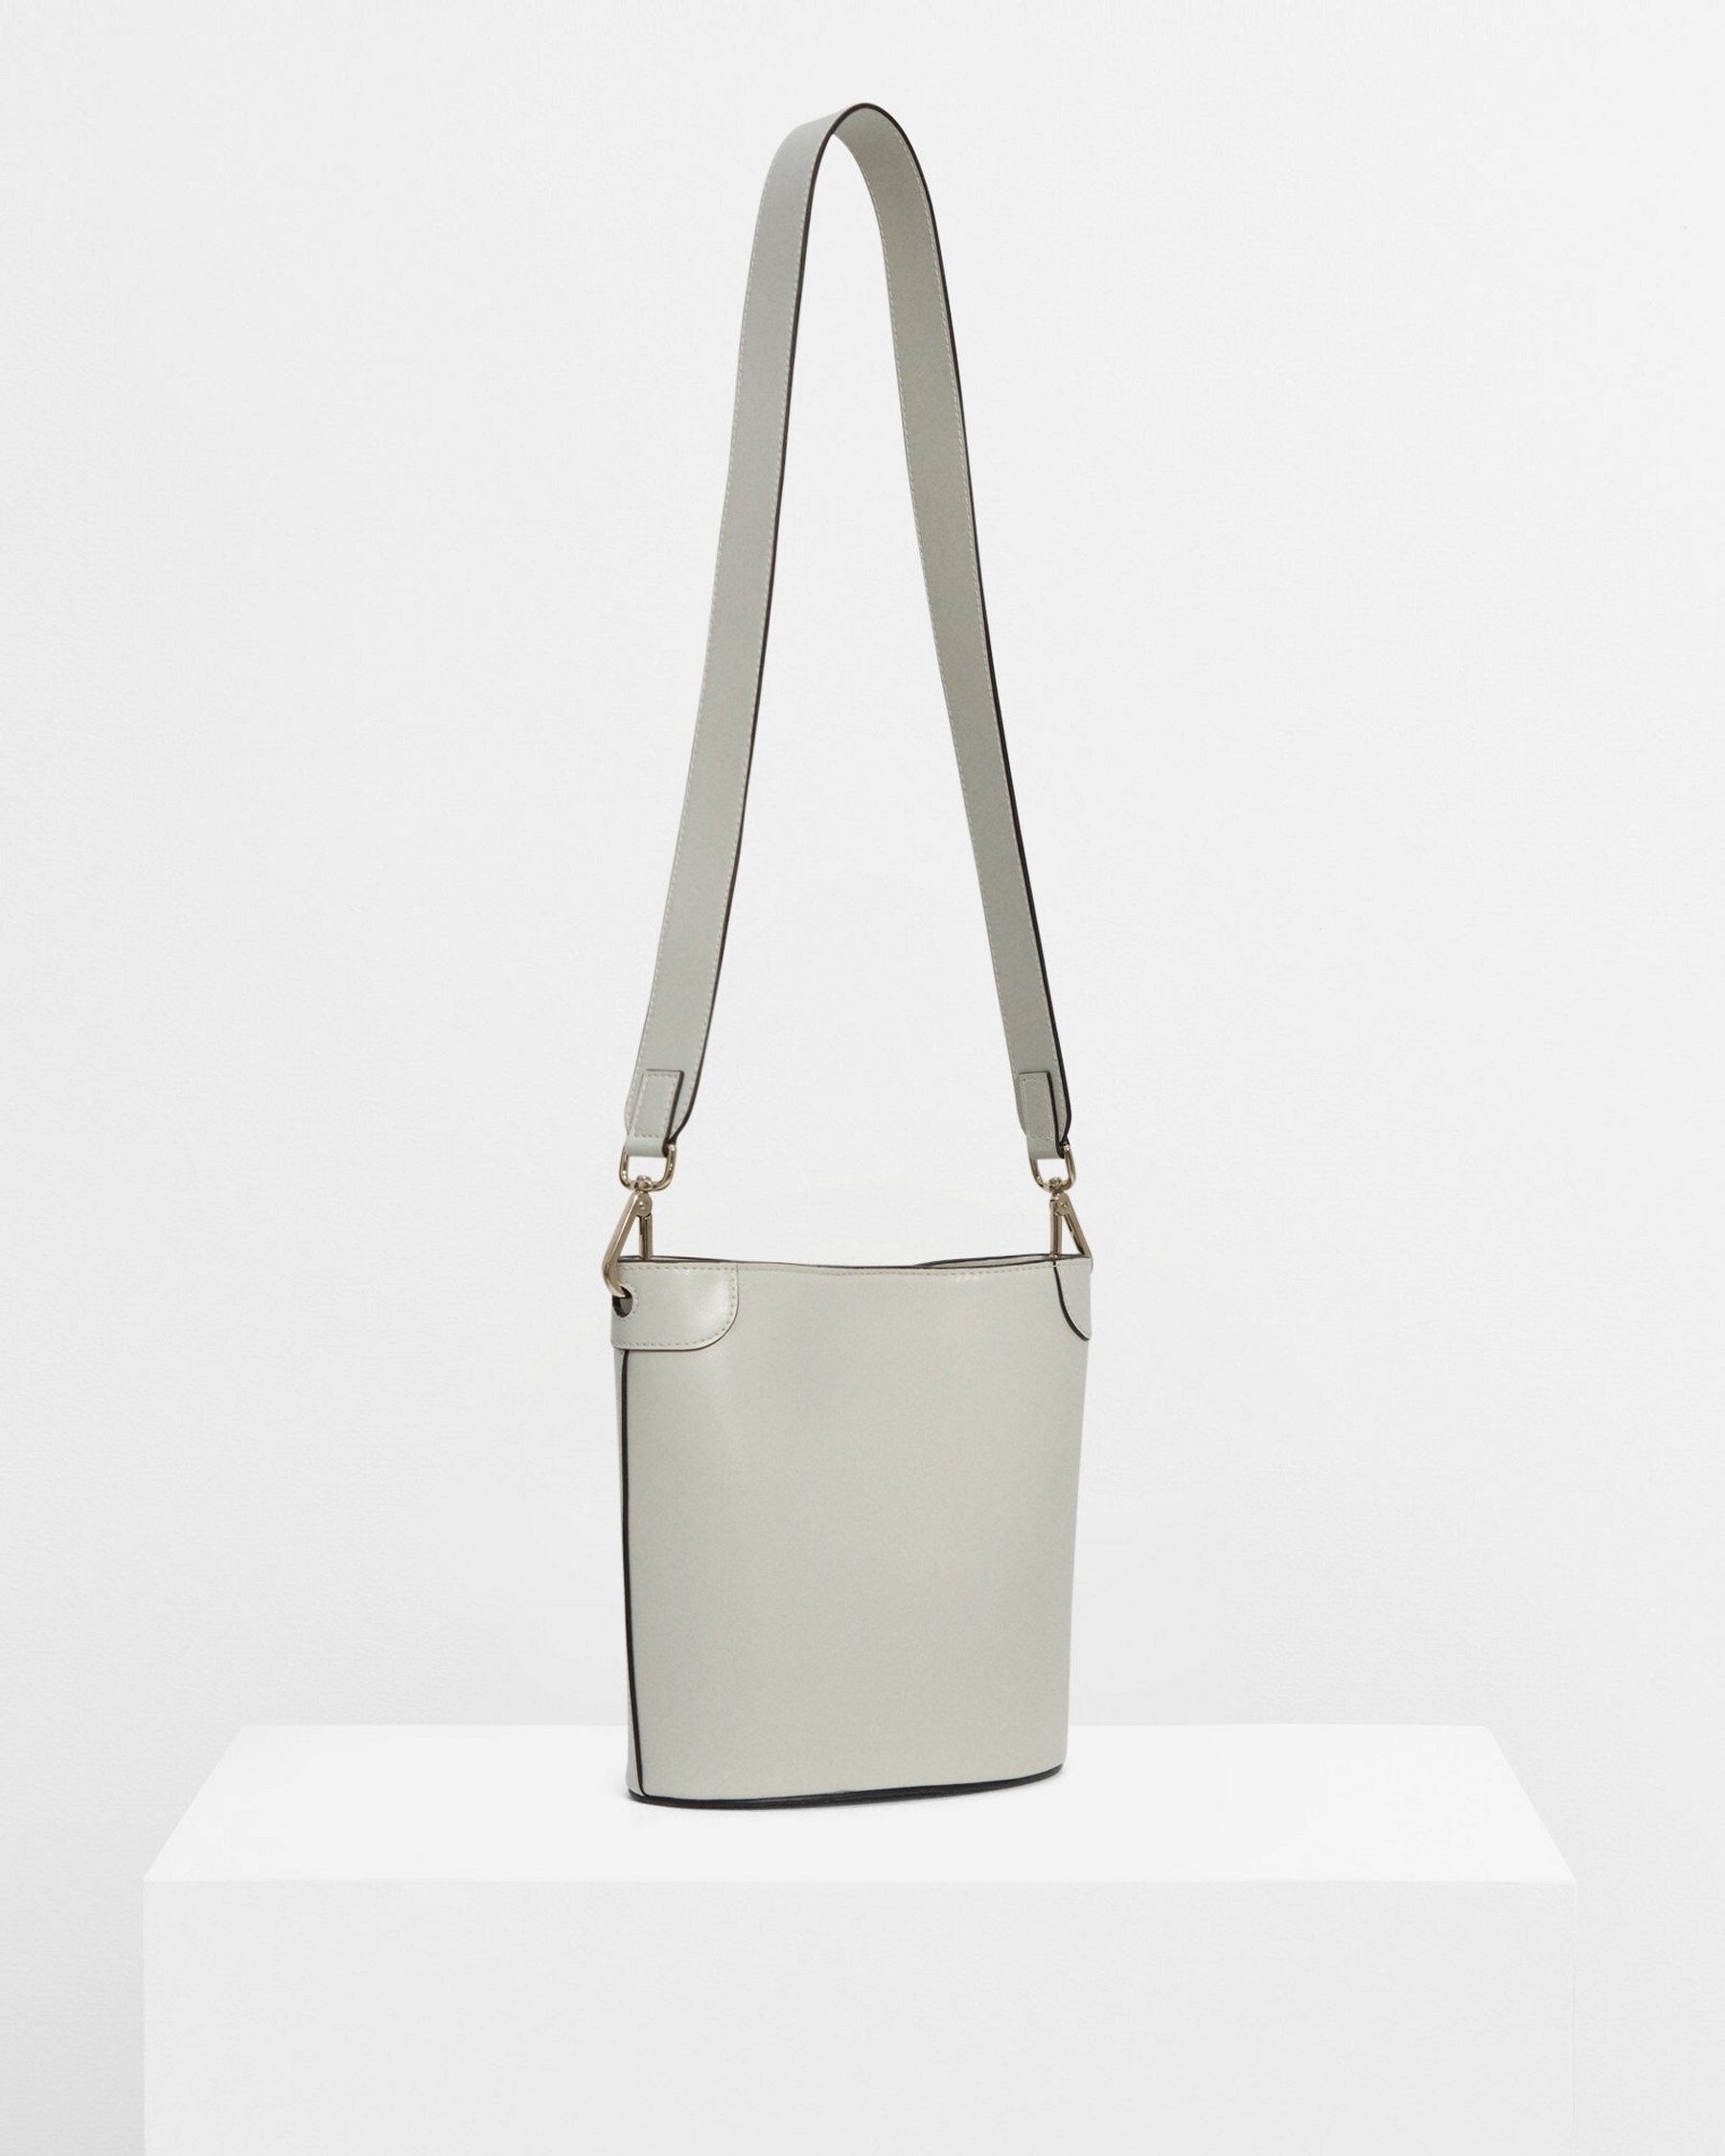 Small Bucket Bag in Leather